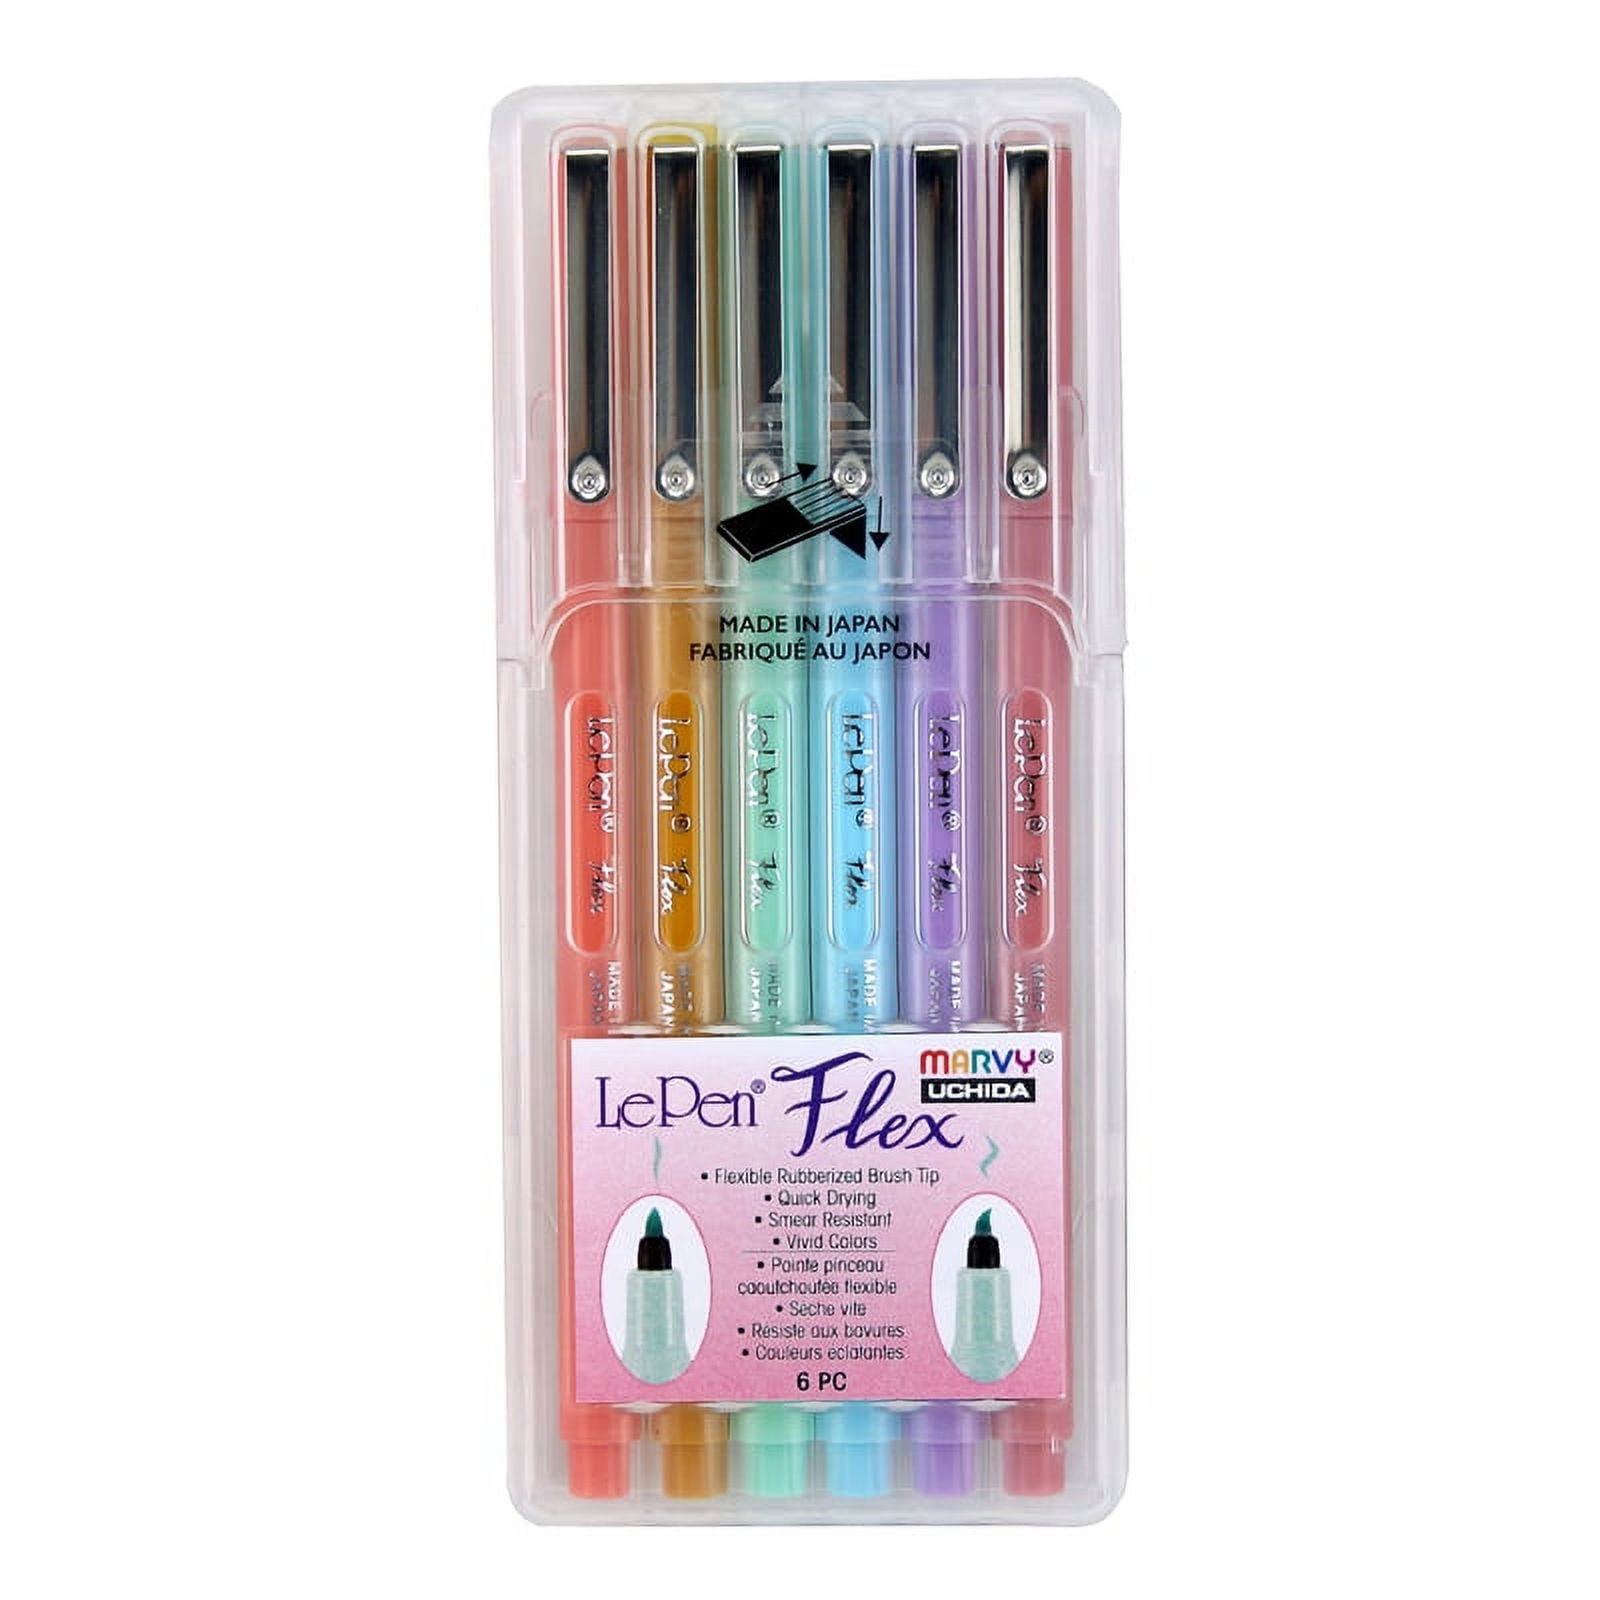 Pen + Gear 256CT Broad Line Washable Markers, Classroom Bulk Pack, Assorted  Colors 